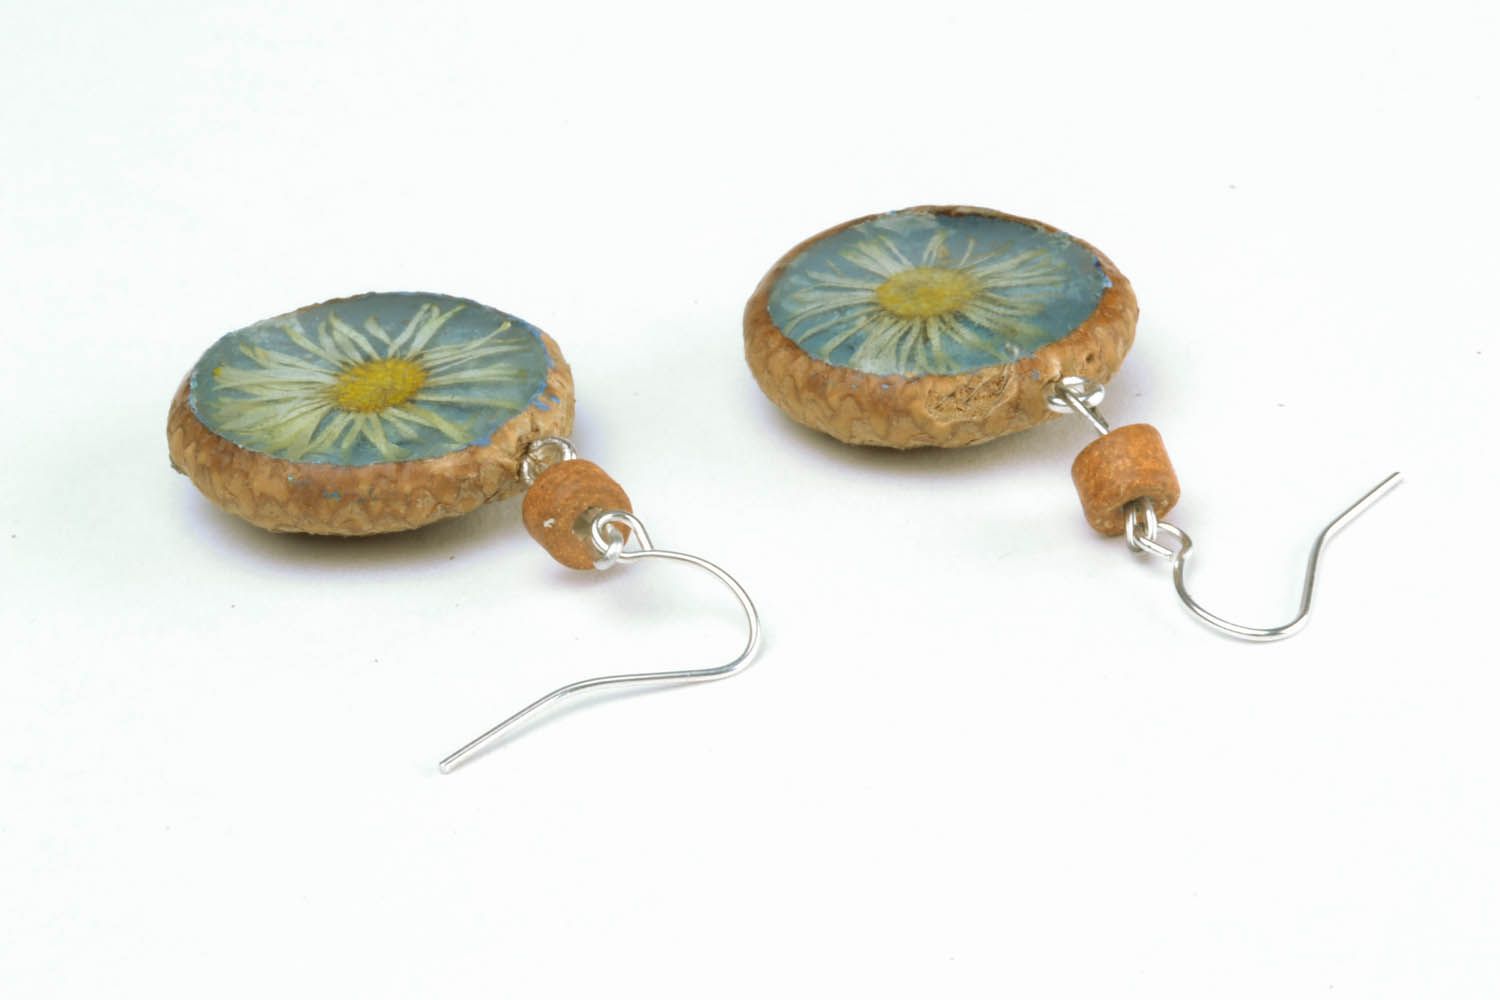 Earrings made of acorns and daisies photo 3